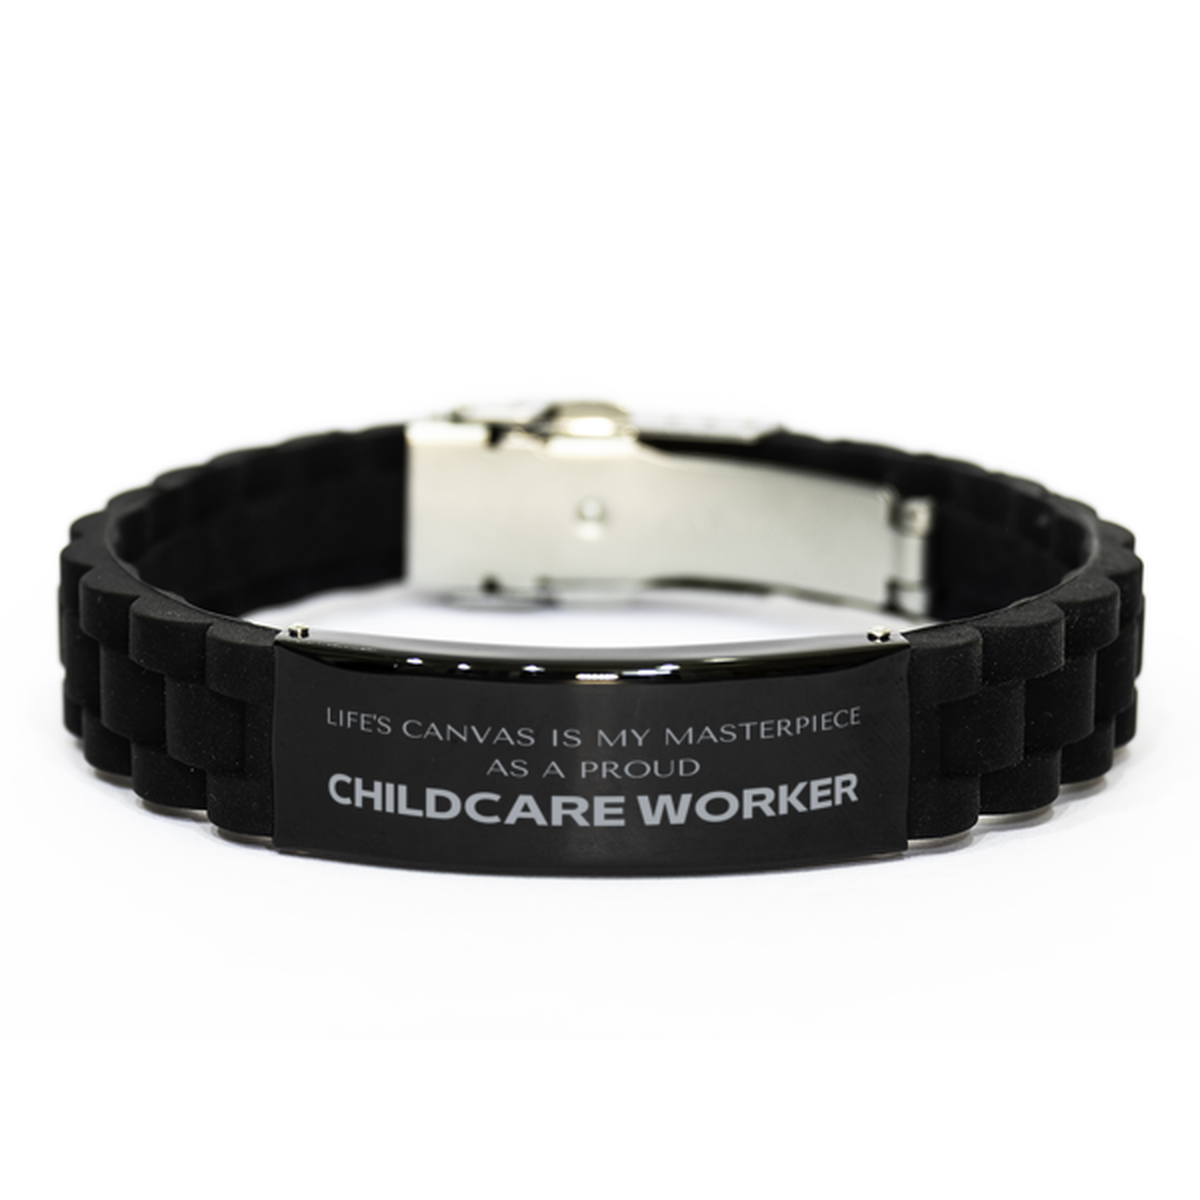 Proud Childcare Worker Gifts, Life's canvas is my masterpiece, Epic Birthday Christmas Unique Black Glidelock Clasp Bracelet For Childcare Worker, Coworkers, Men, Women, Friends